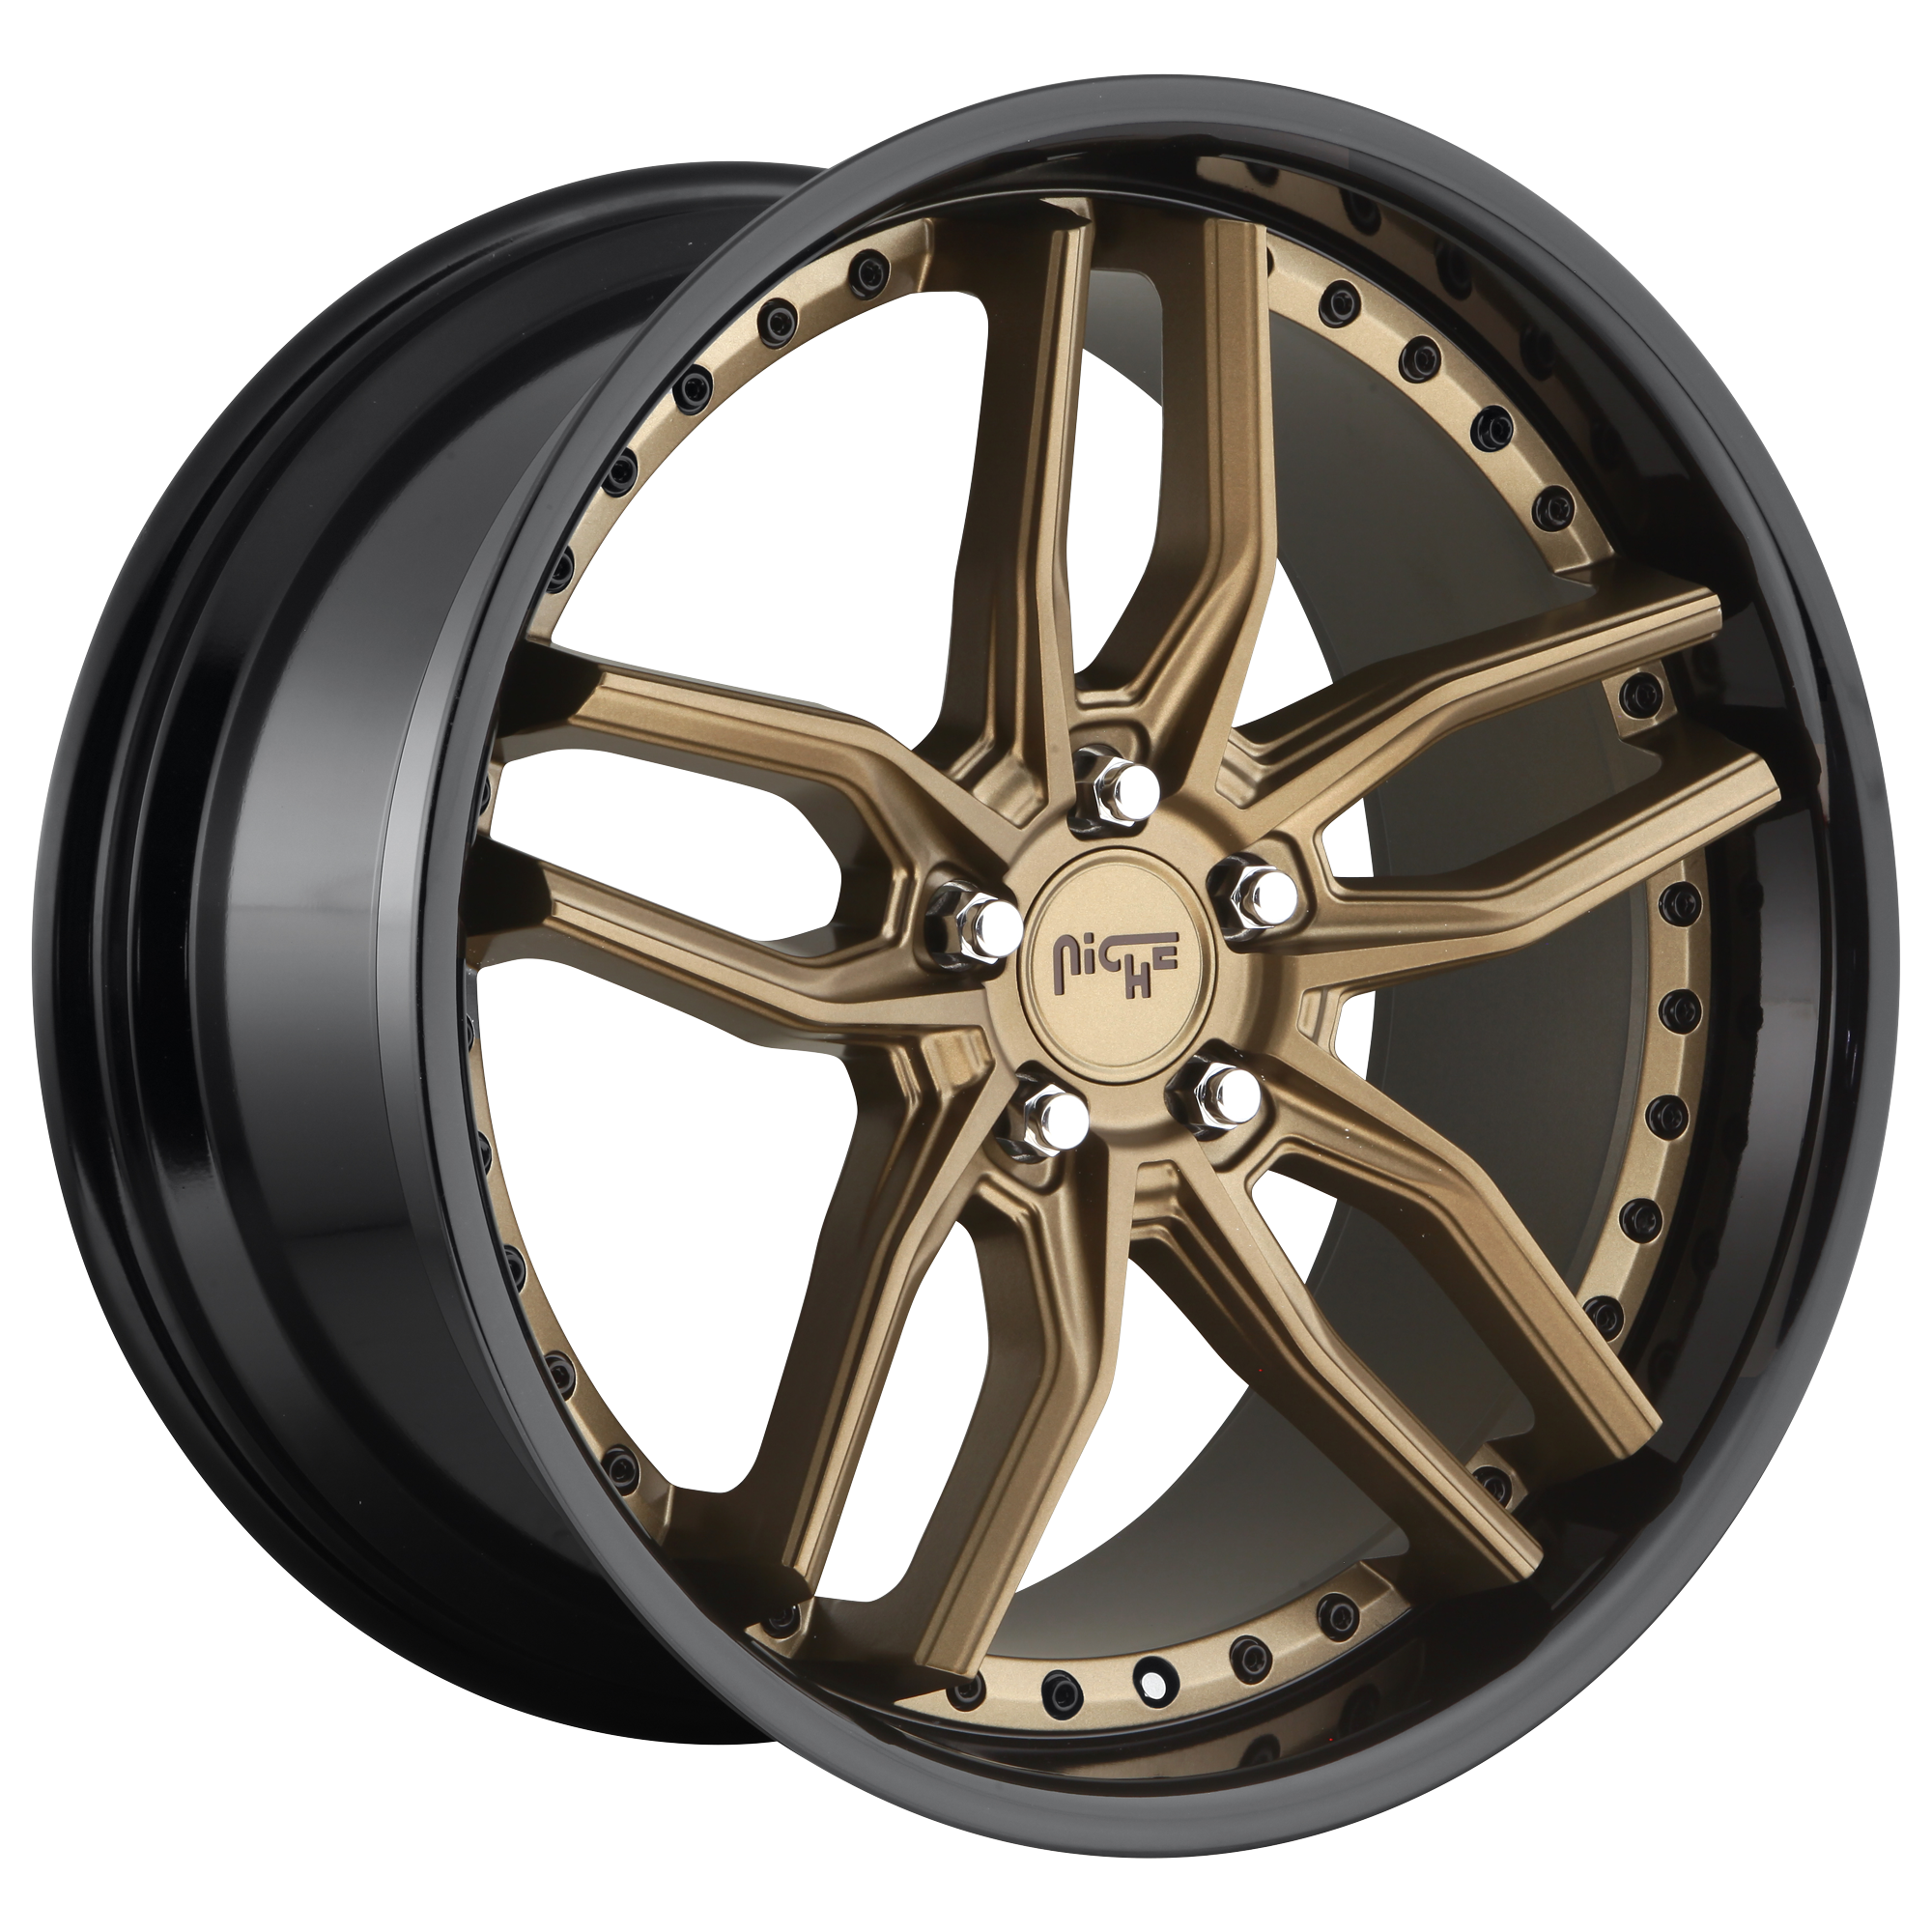 METHOS 20x10 5x114.30 MATTE BRONZE BLACK BEAD RING (40 mm) - Tires and Engine Performance